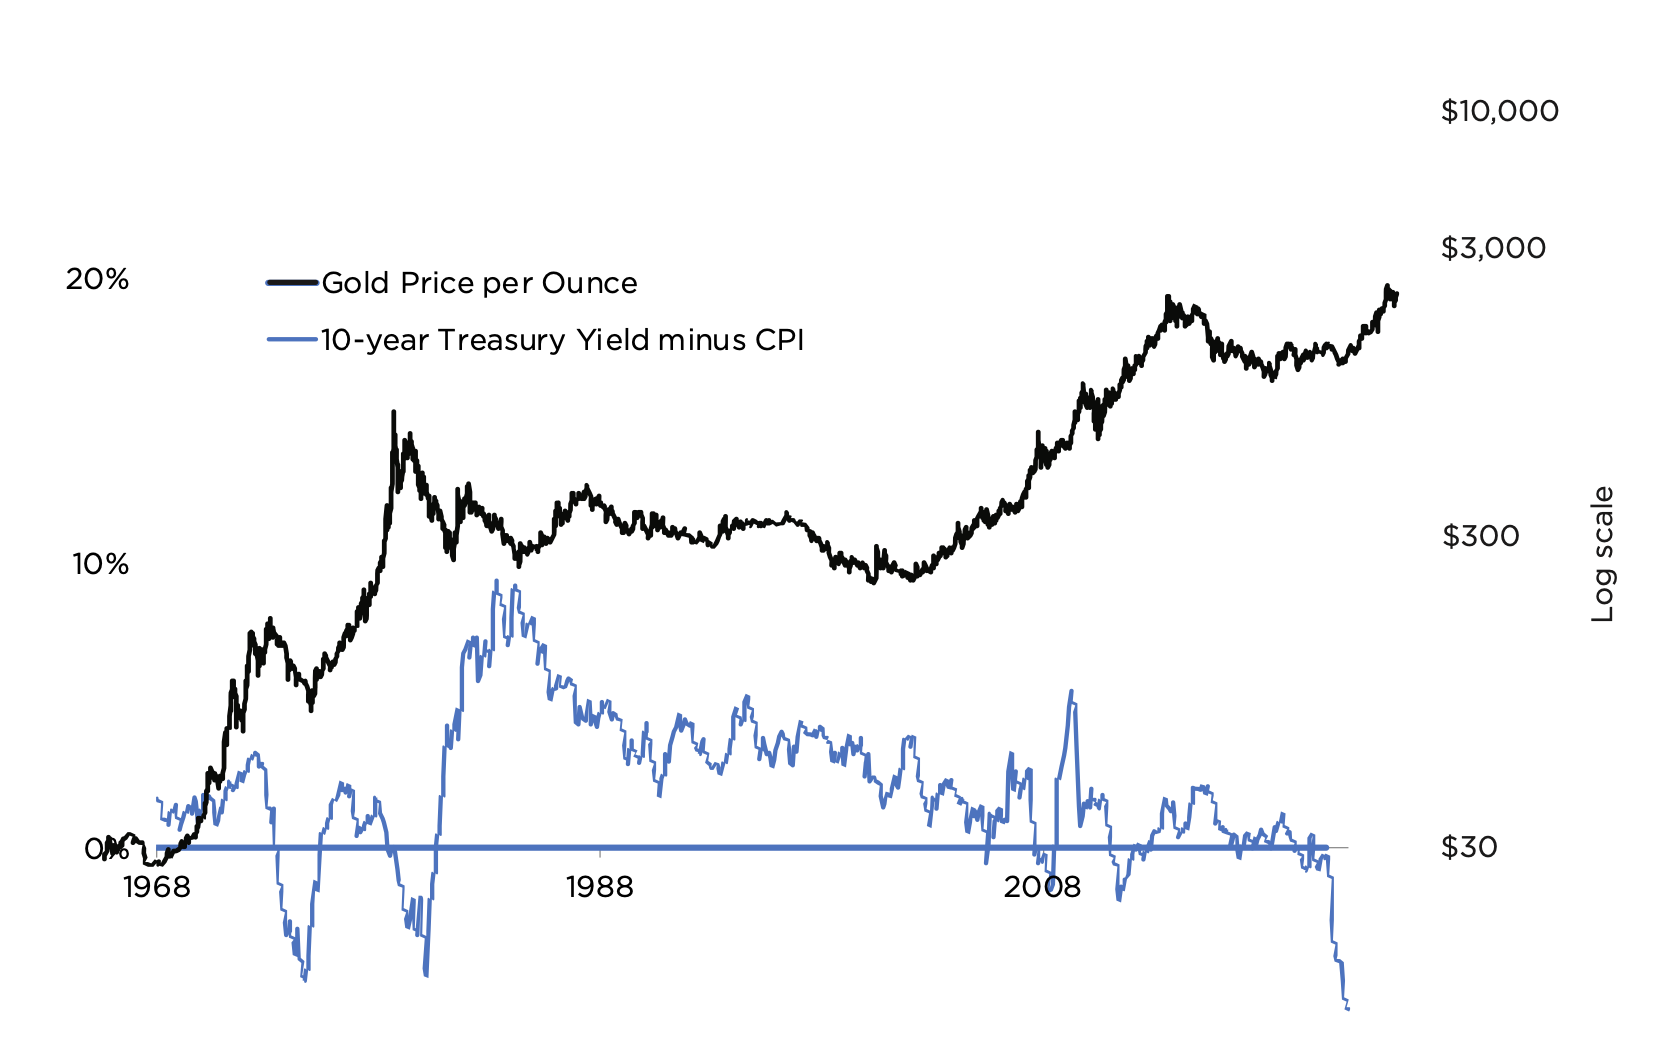 overlay log chart showing the price of gold in log scale and the real rate of return